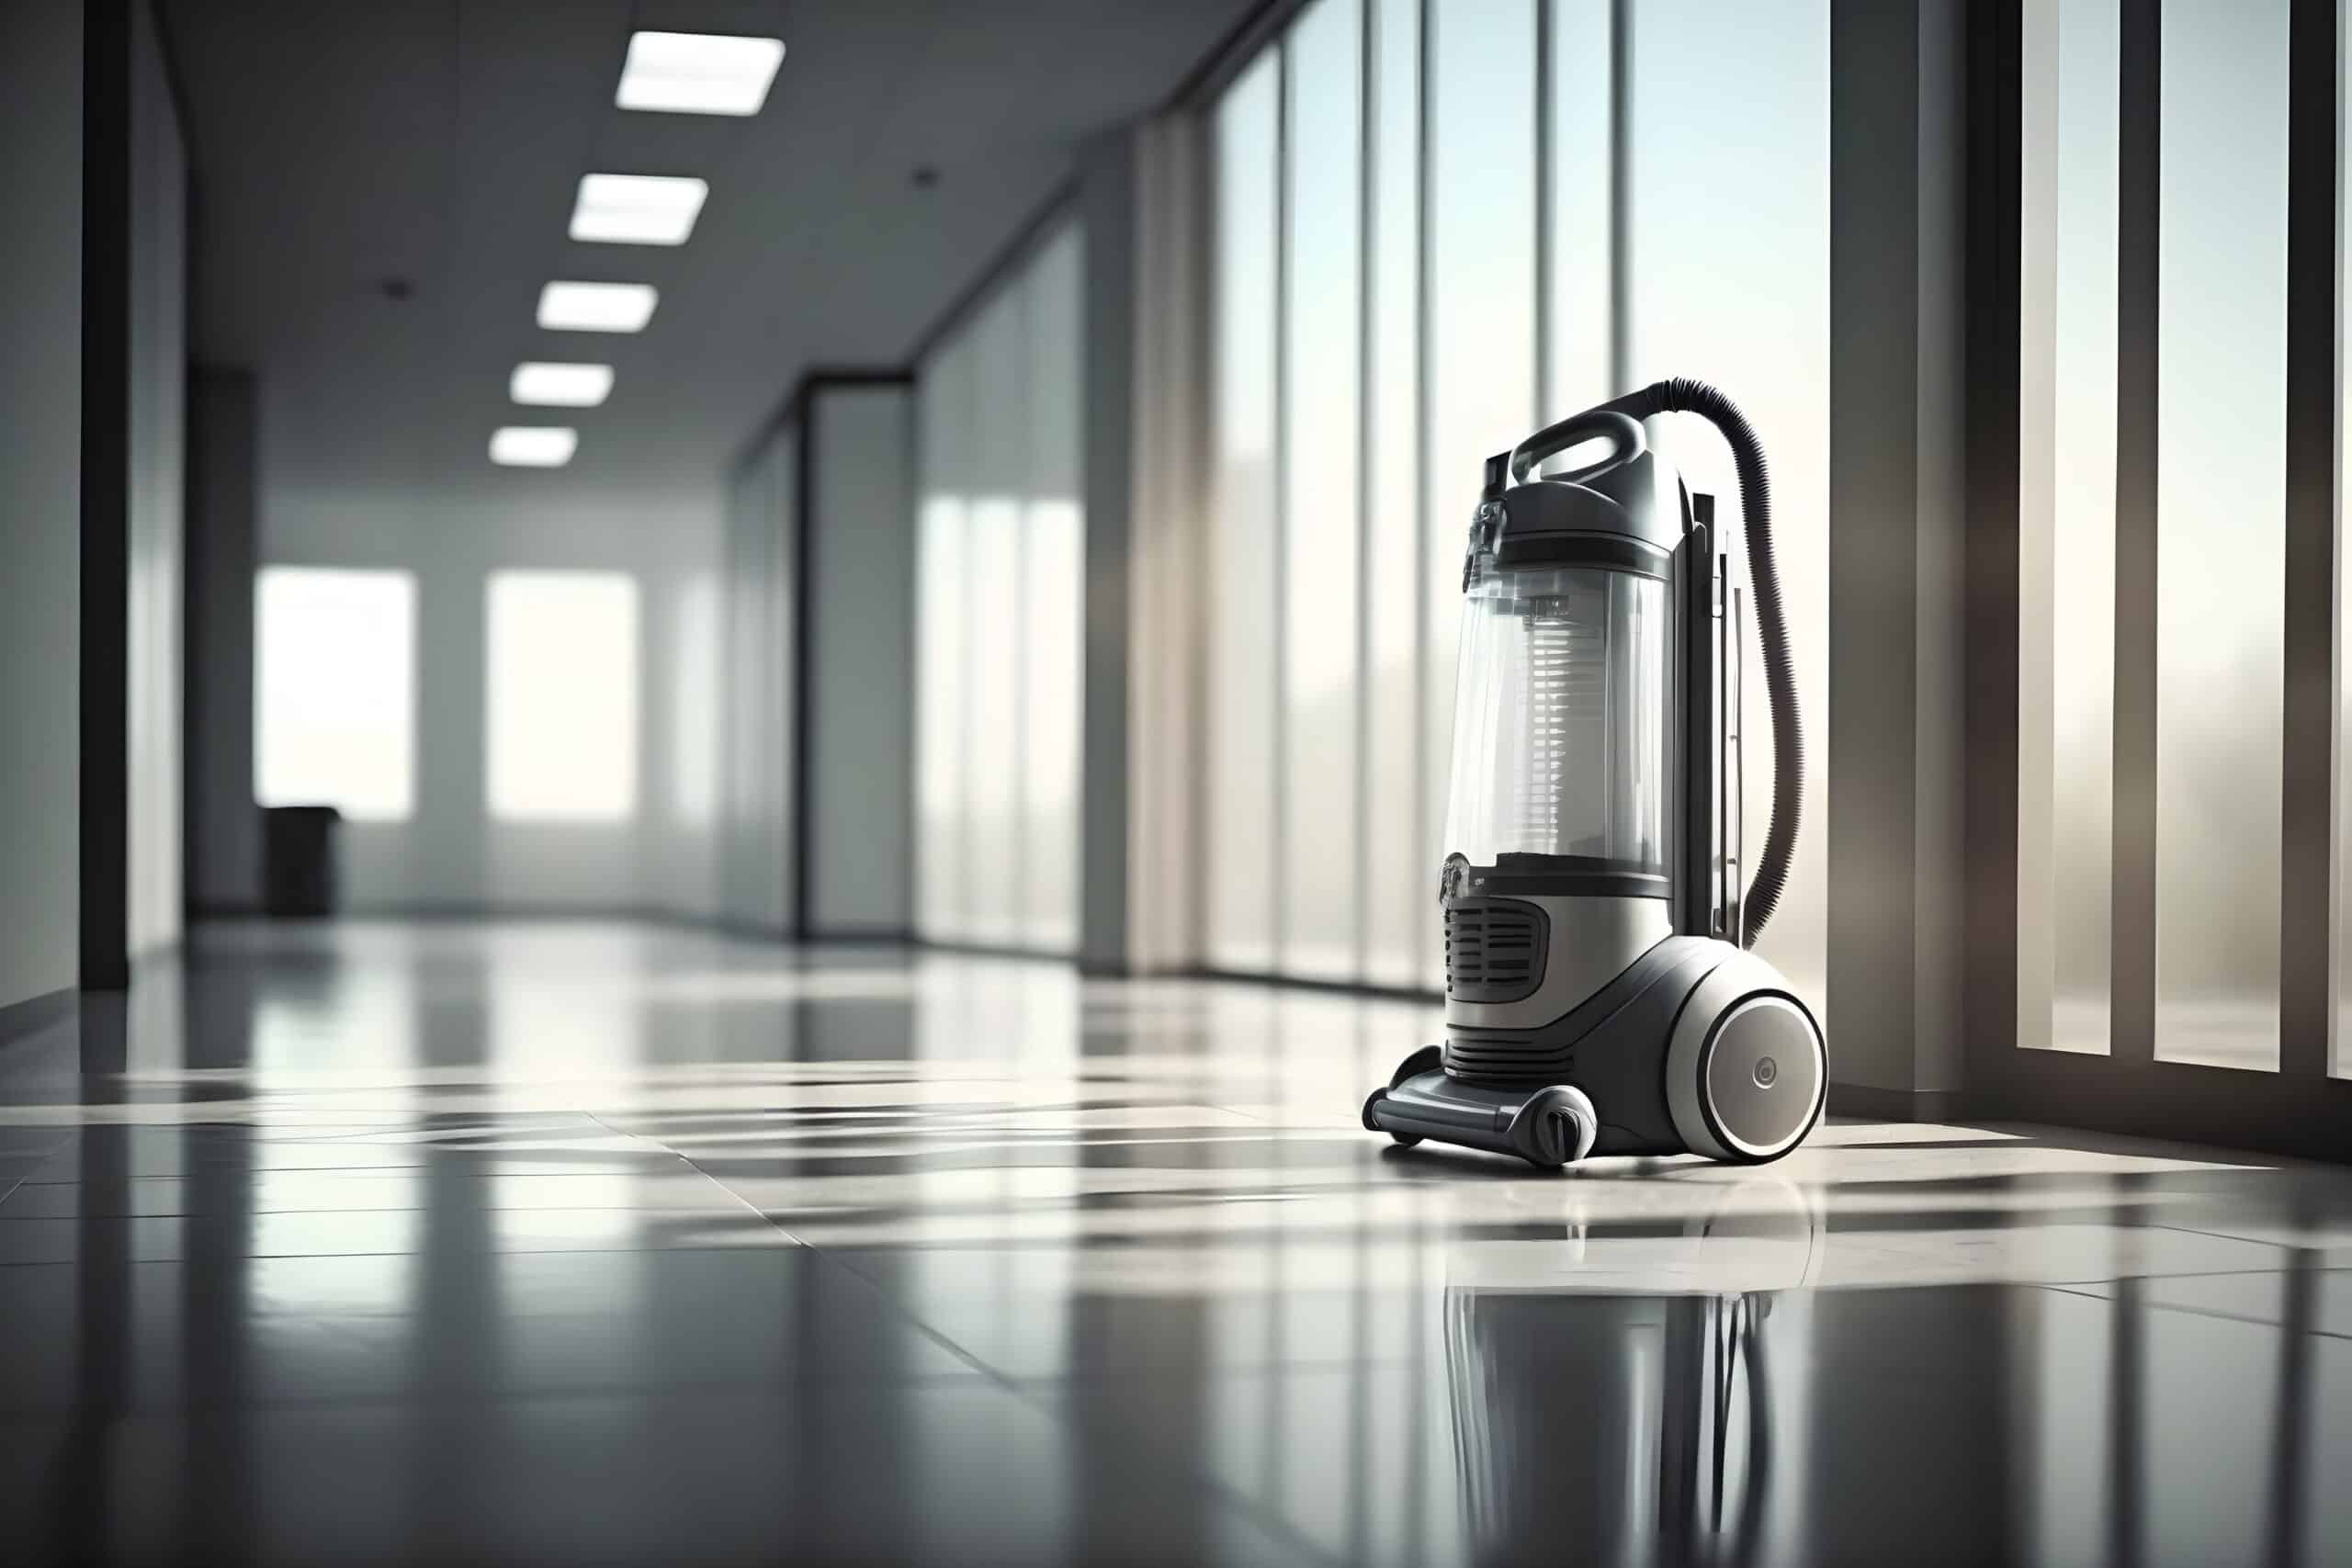 www.appr.com : How Does A Wet Dry Vacuum Cleaner Work?